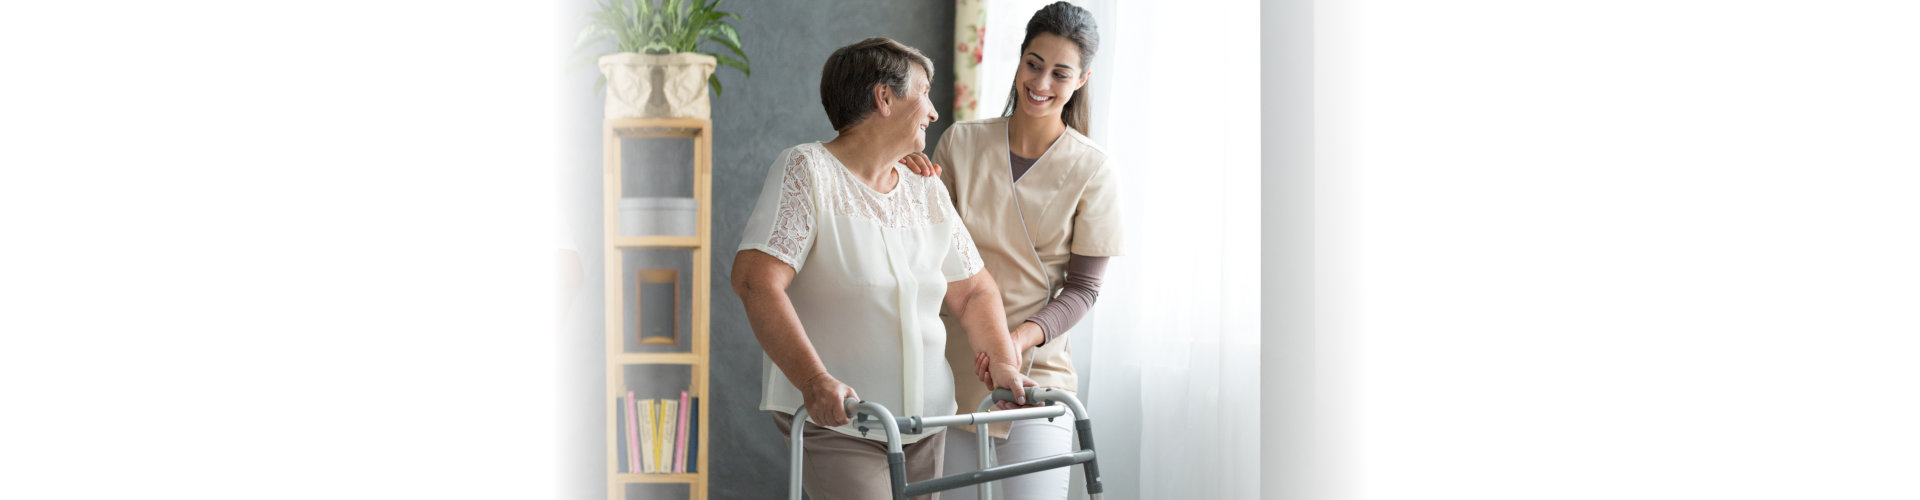 Elderly woman using a walker smiling with younger woman